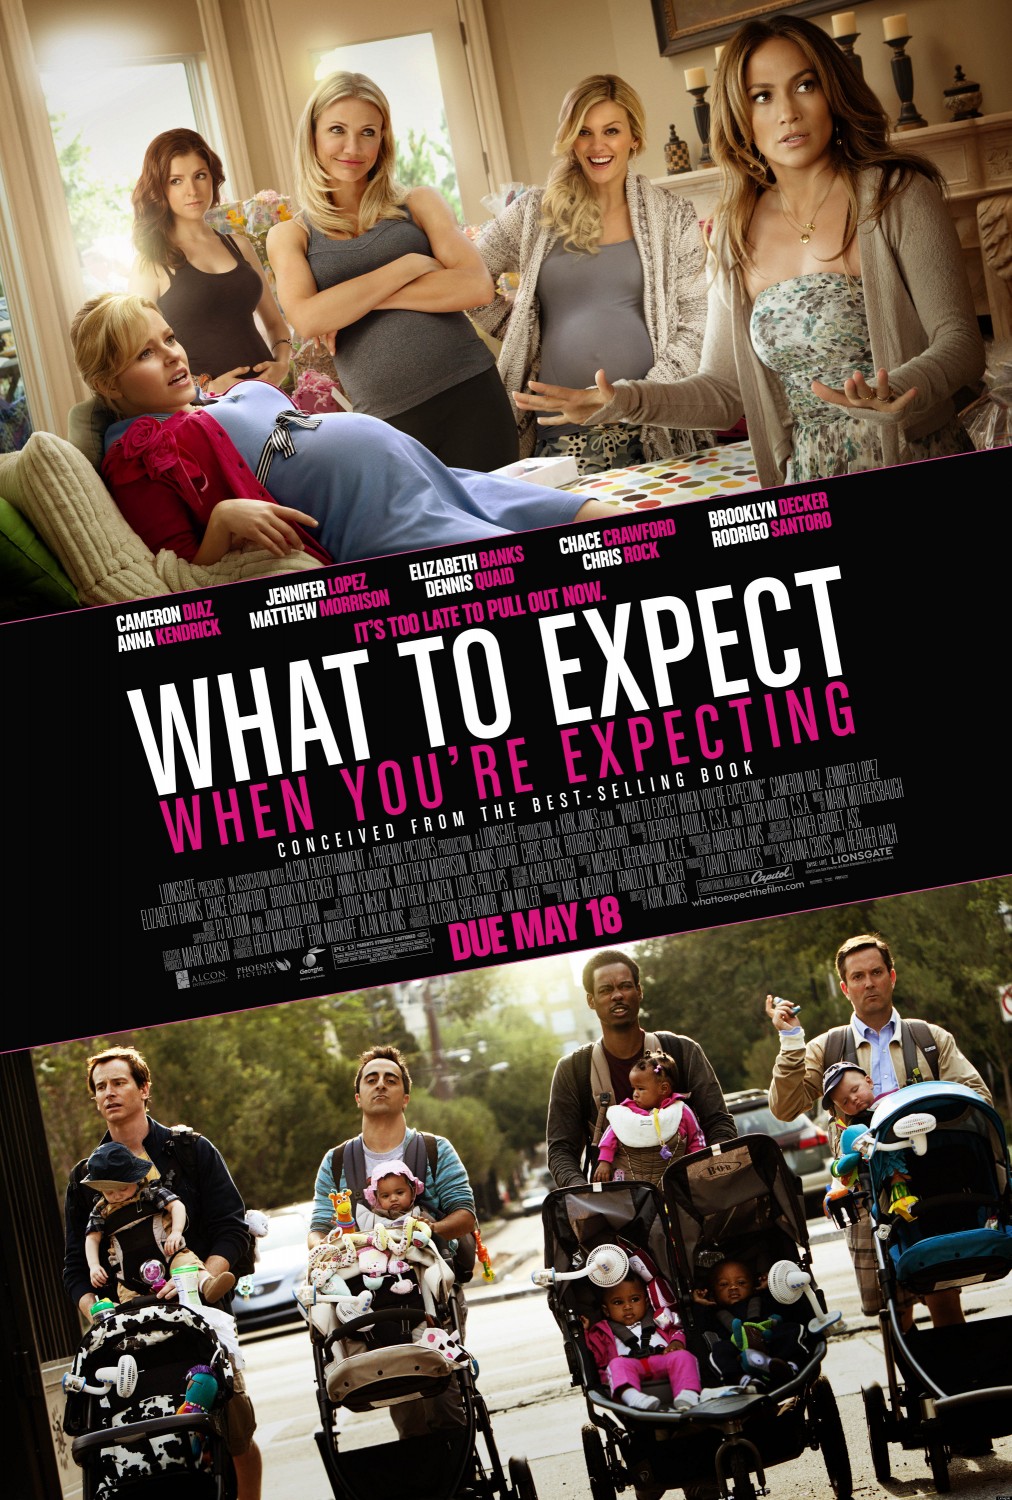 Extra Large Movie Poster Image for What to Expect When You're Expecting (#8 of 8)